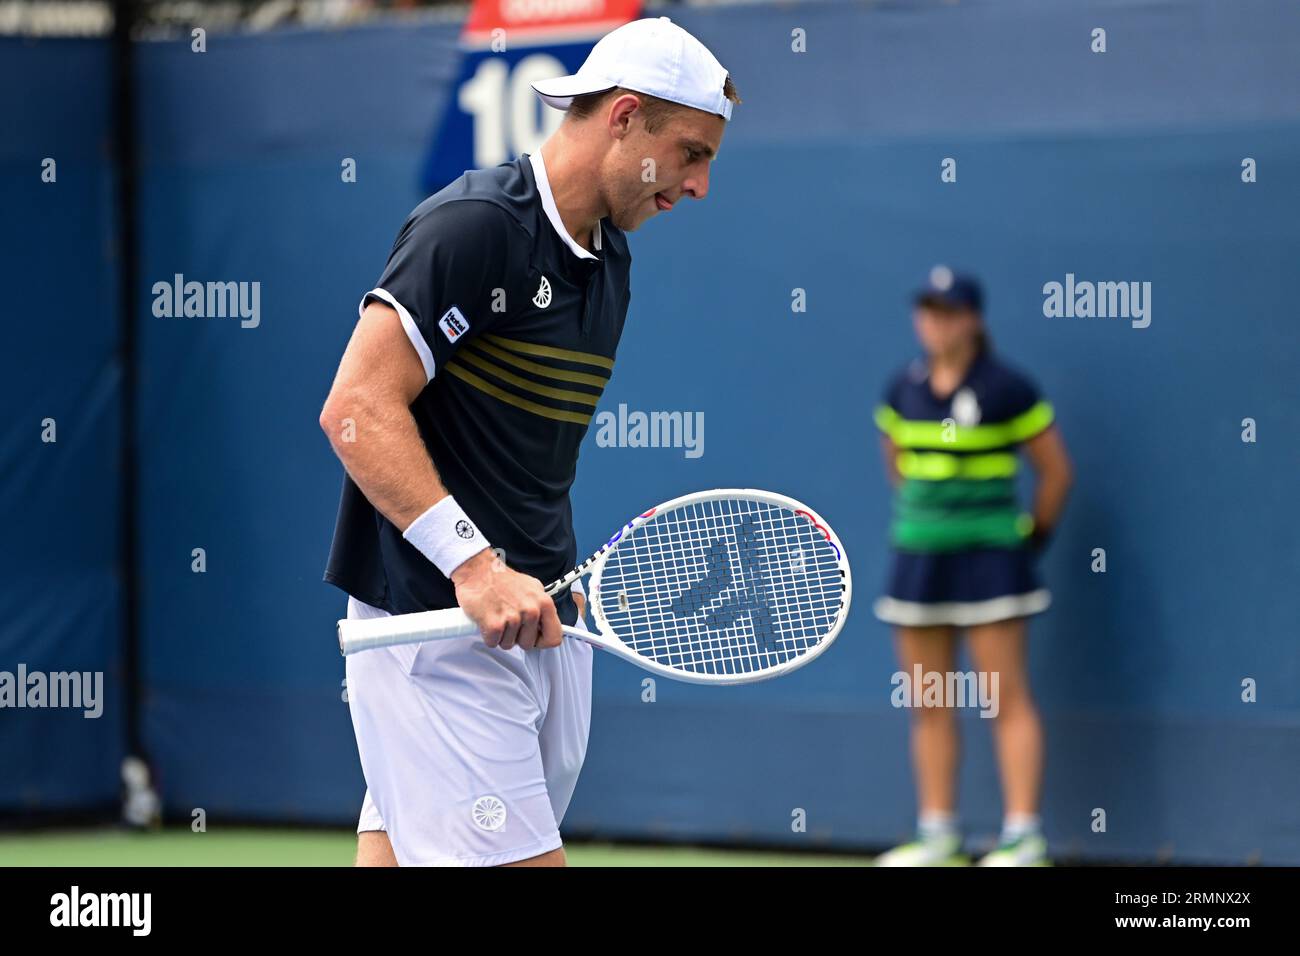 Tallon Griekspoor in action during a mens singles match at the 2023 US Open, Tuesday, Aug